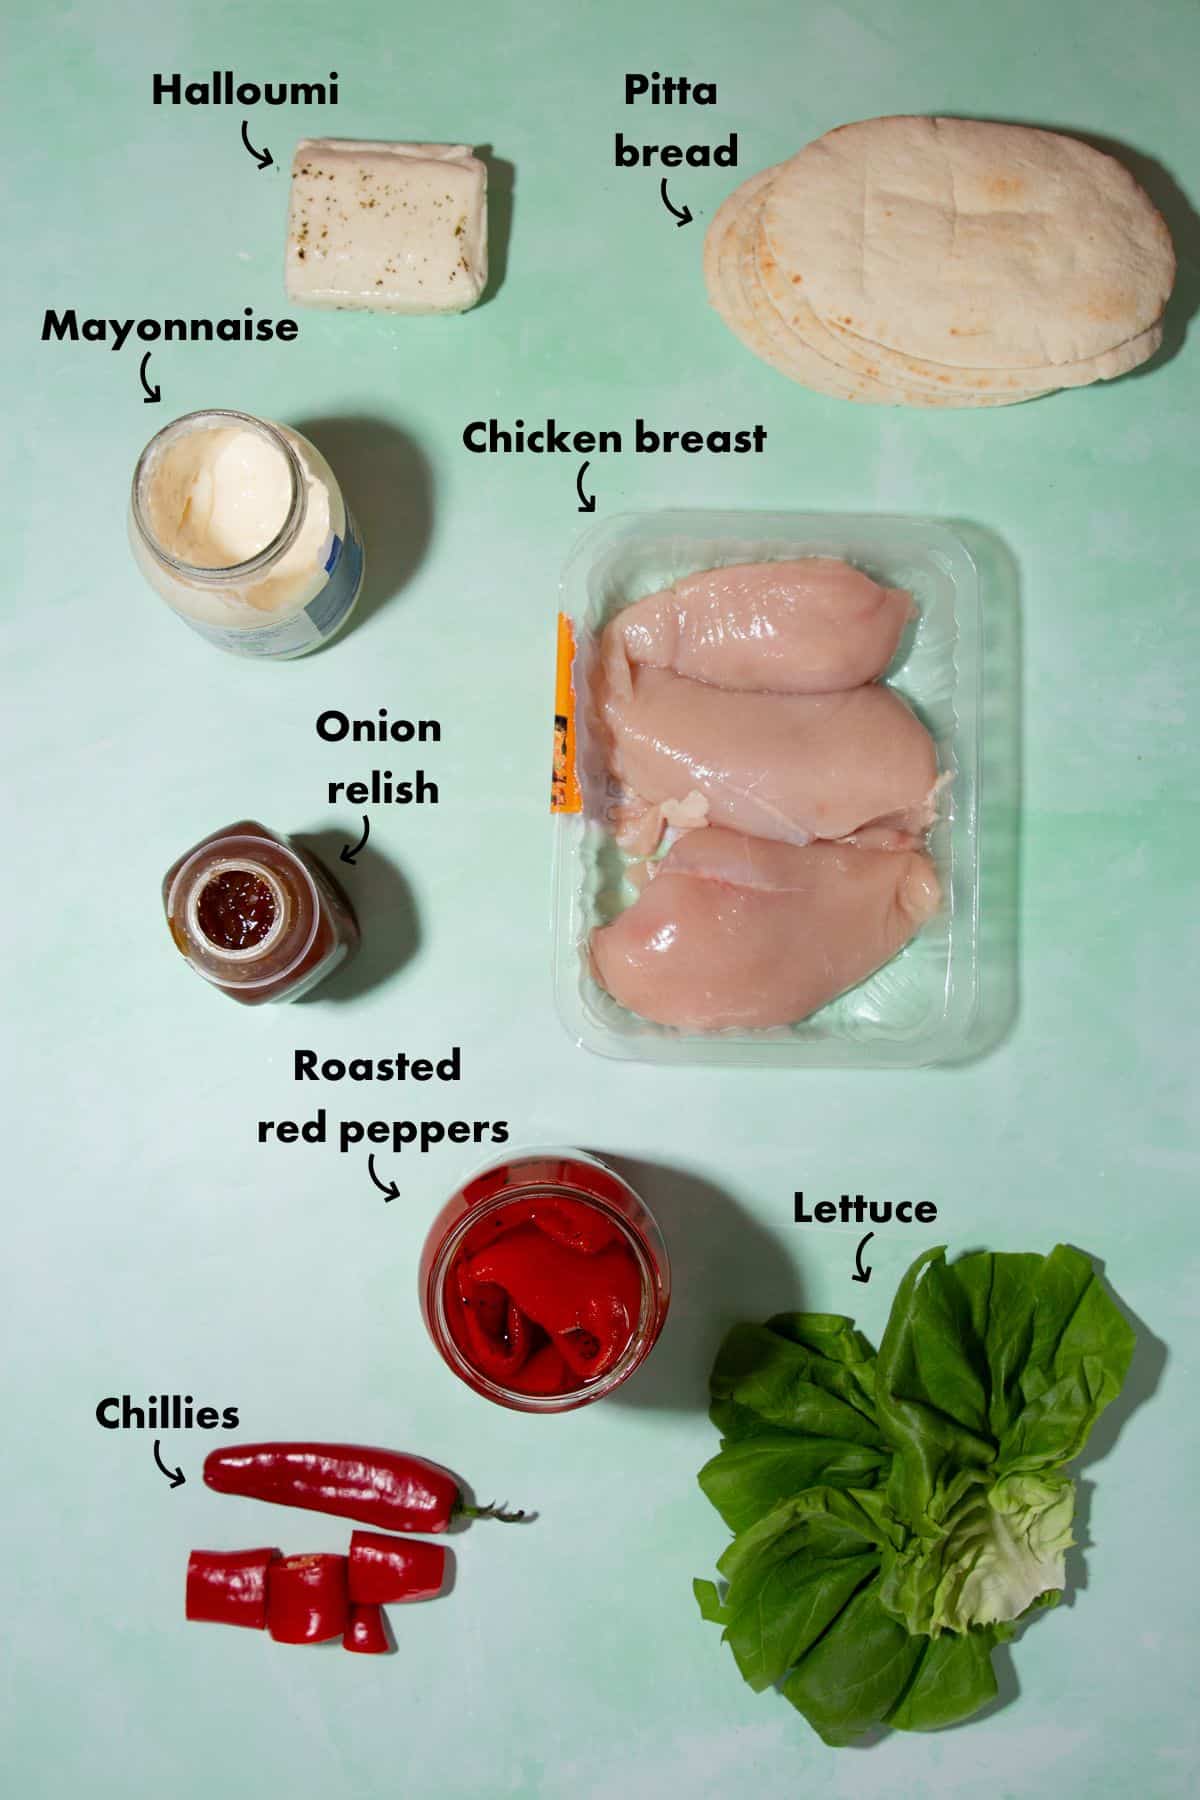 Ingredients to make pitta bread with chicken and halloumi, laid out on a pale blue background and labelled.